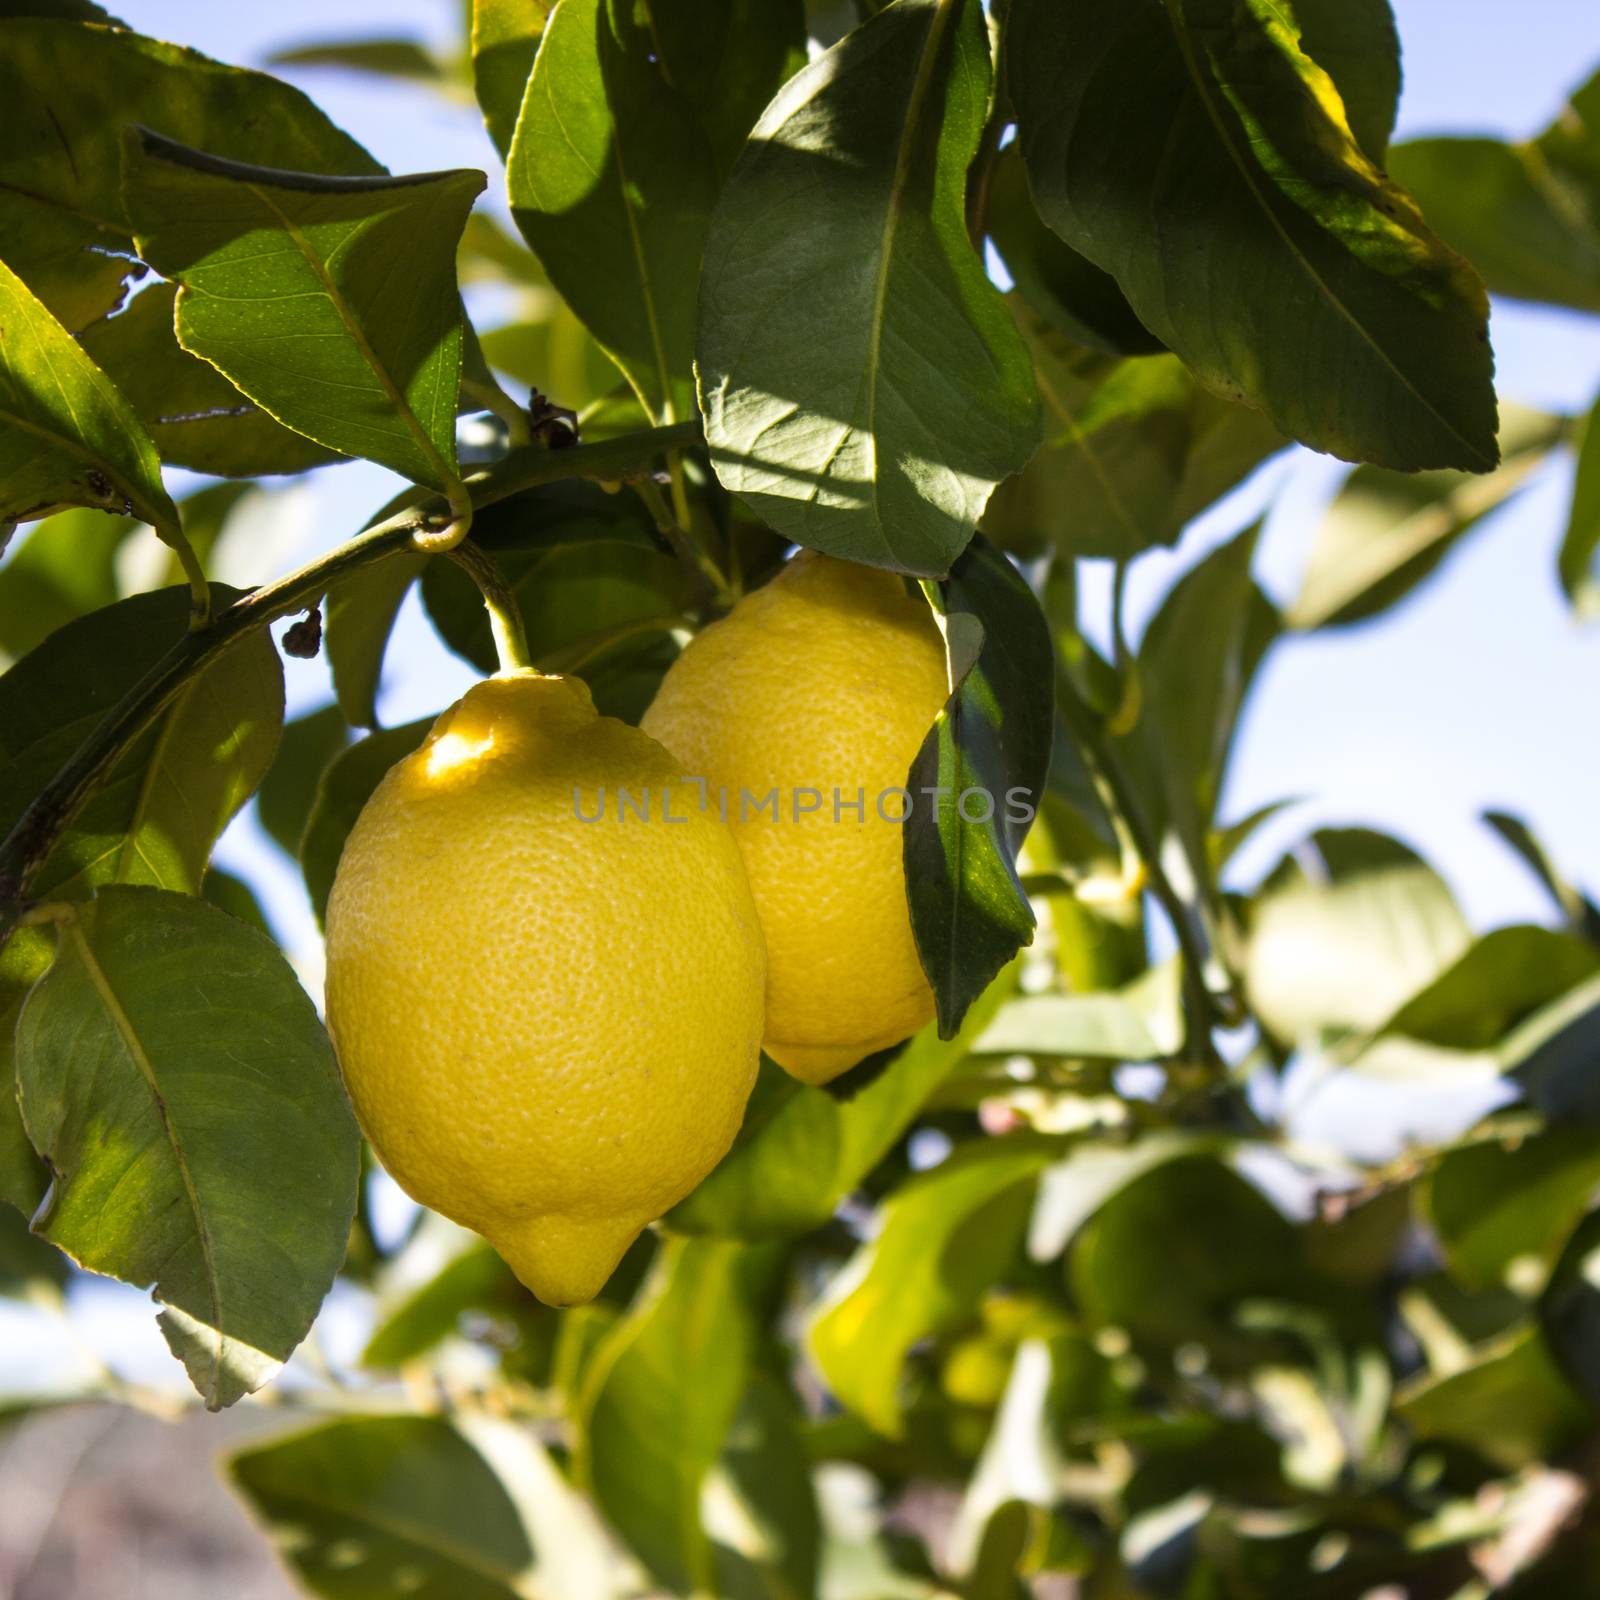 Lemons in the trees of an orchard